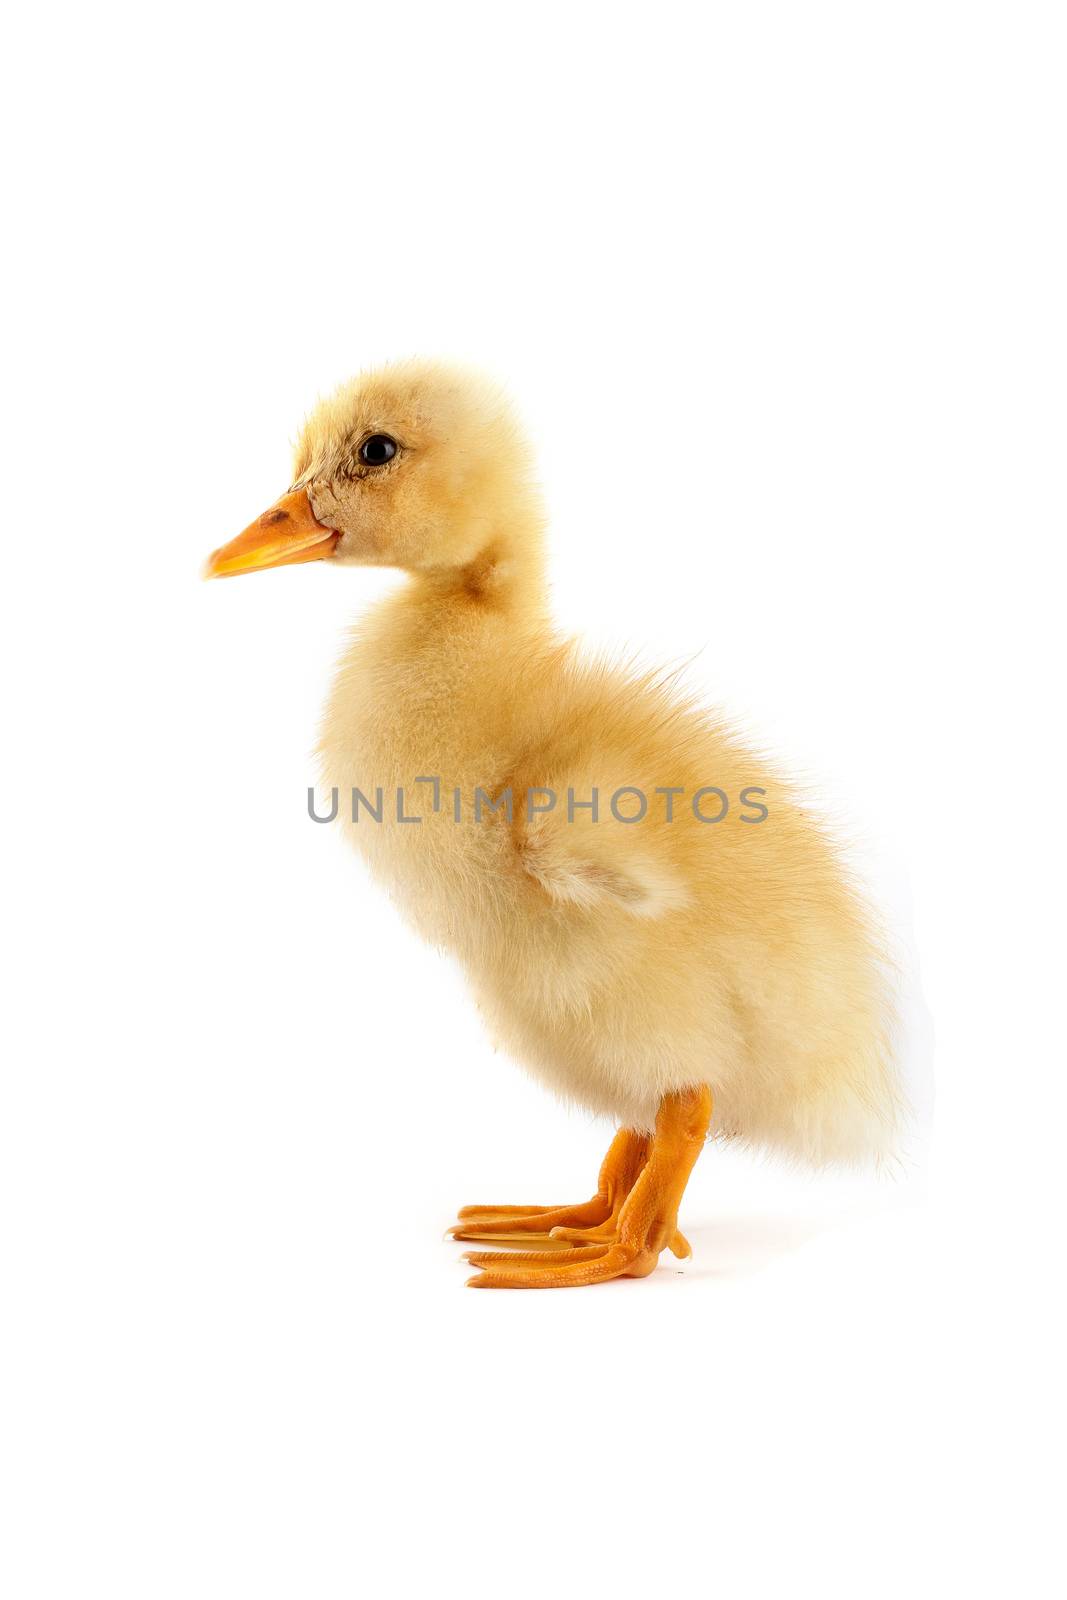 The small yellow duckling isolated on a white background